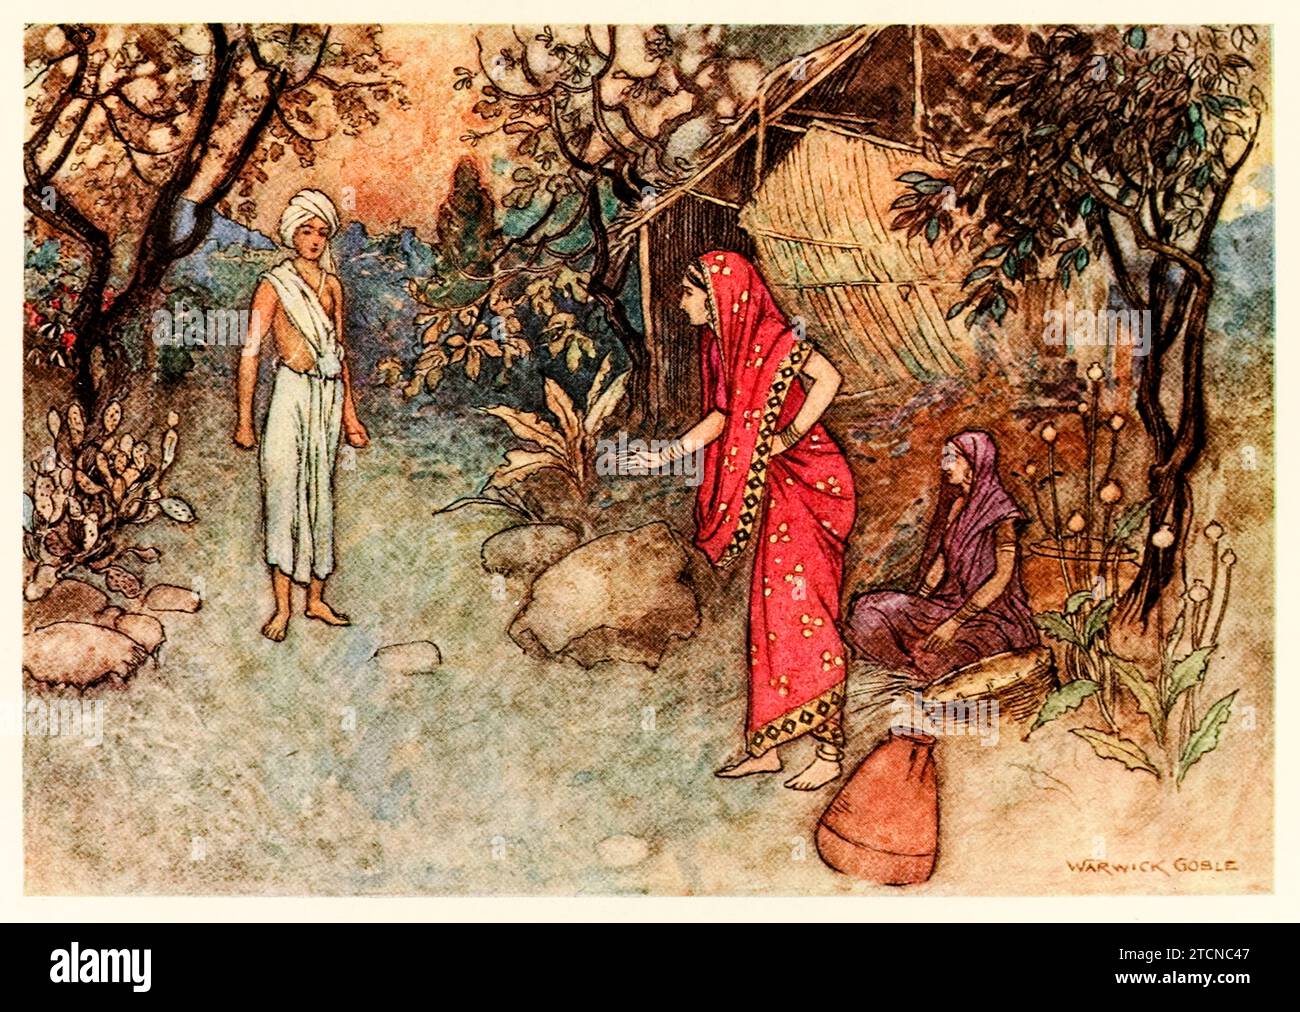 ‘How is it that you have returned so soon’ from ‘Folk-tales of Bengal’ by Lal Behari Day (1824-1882), illustration by Warwick Goble (1862-1972). Photograph from a 1912 edition. Credit: Private Collection / AF Fotografie Stock Photo